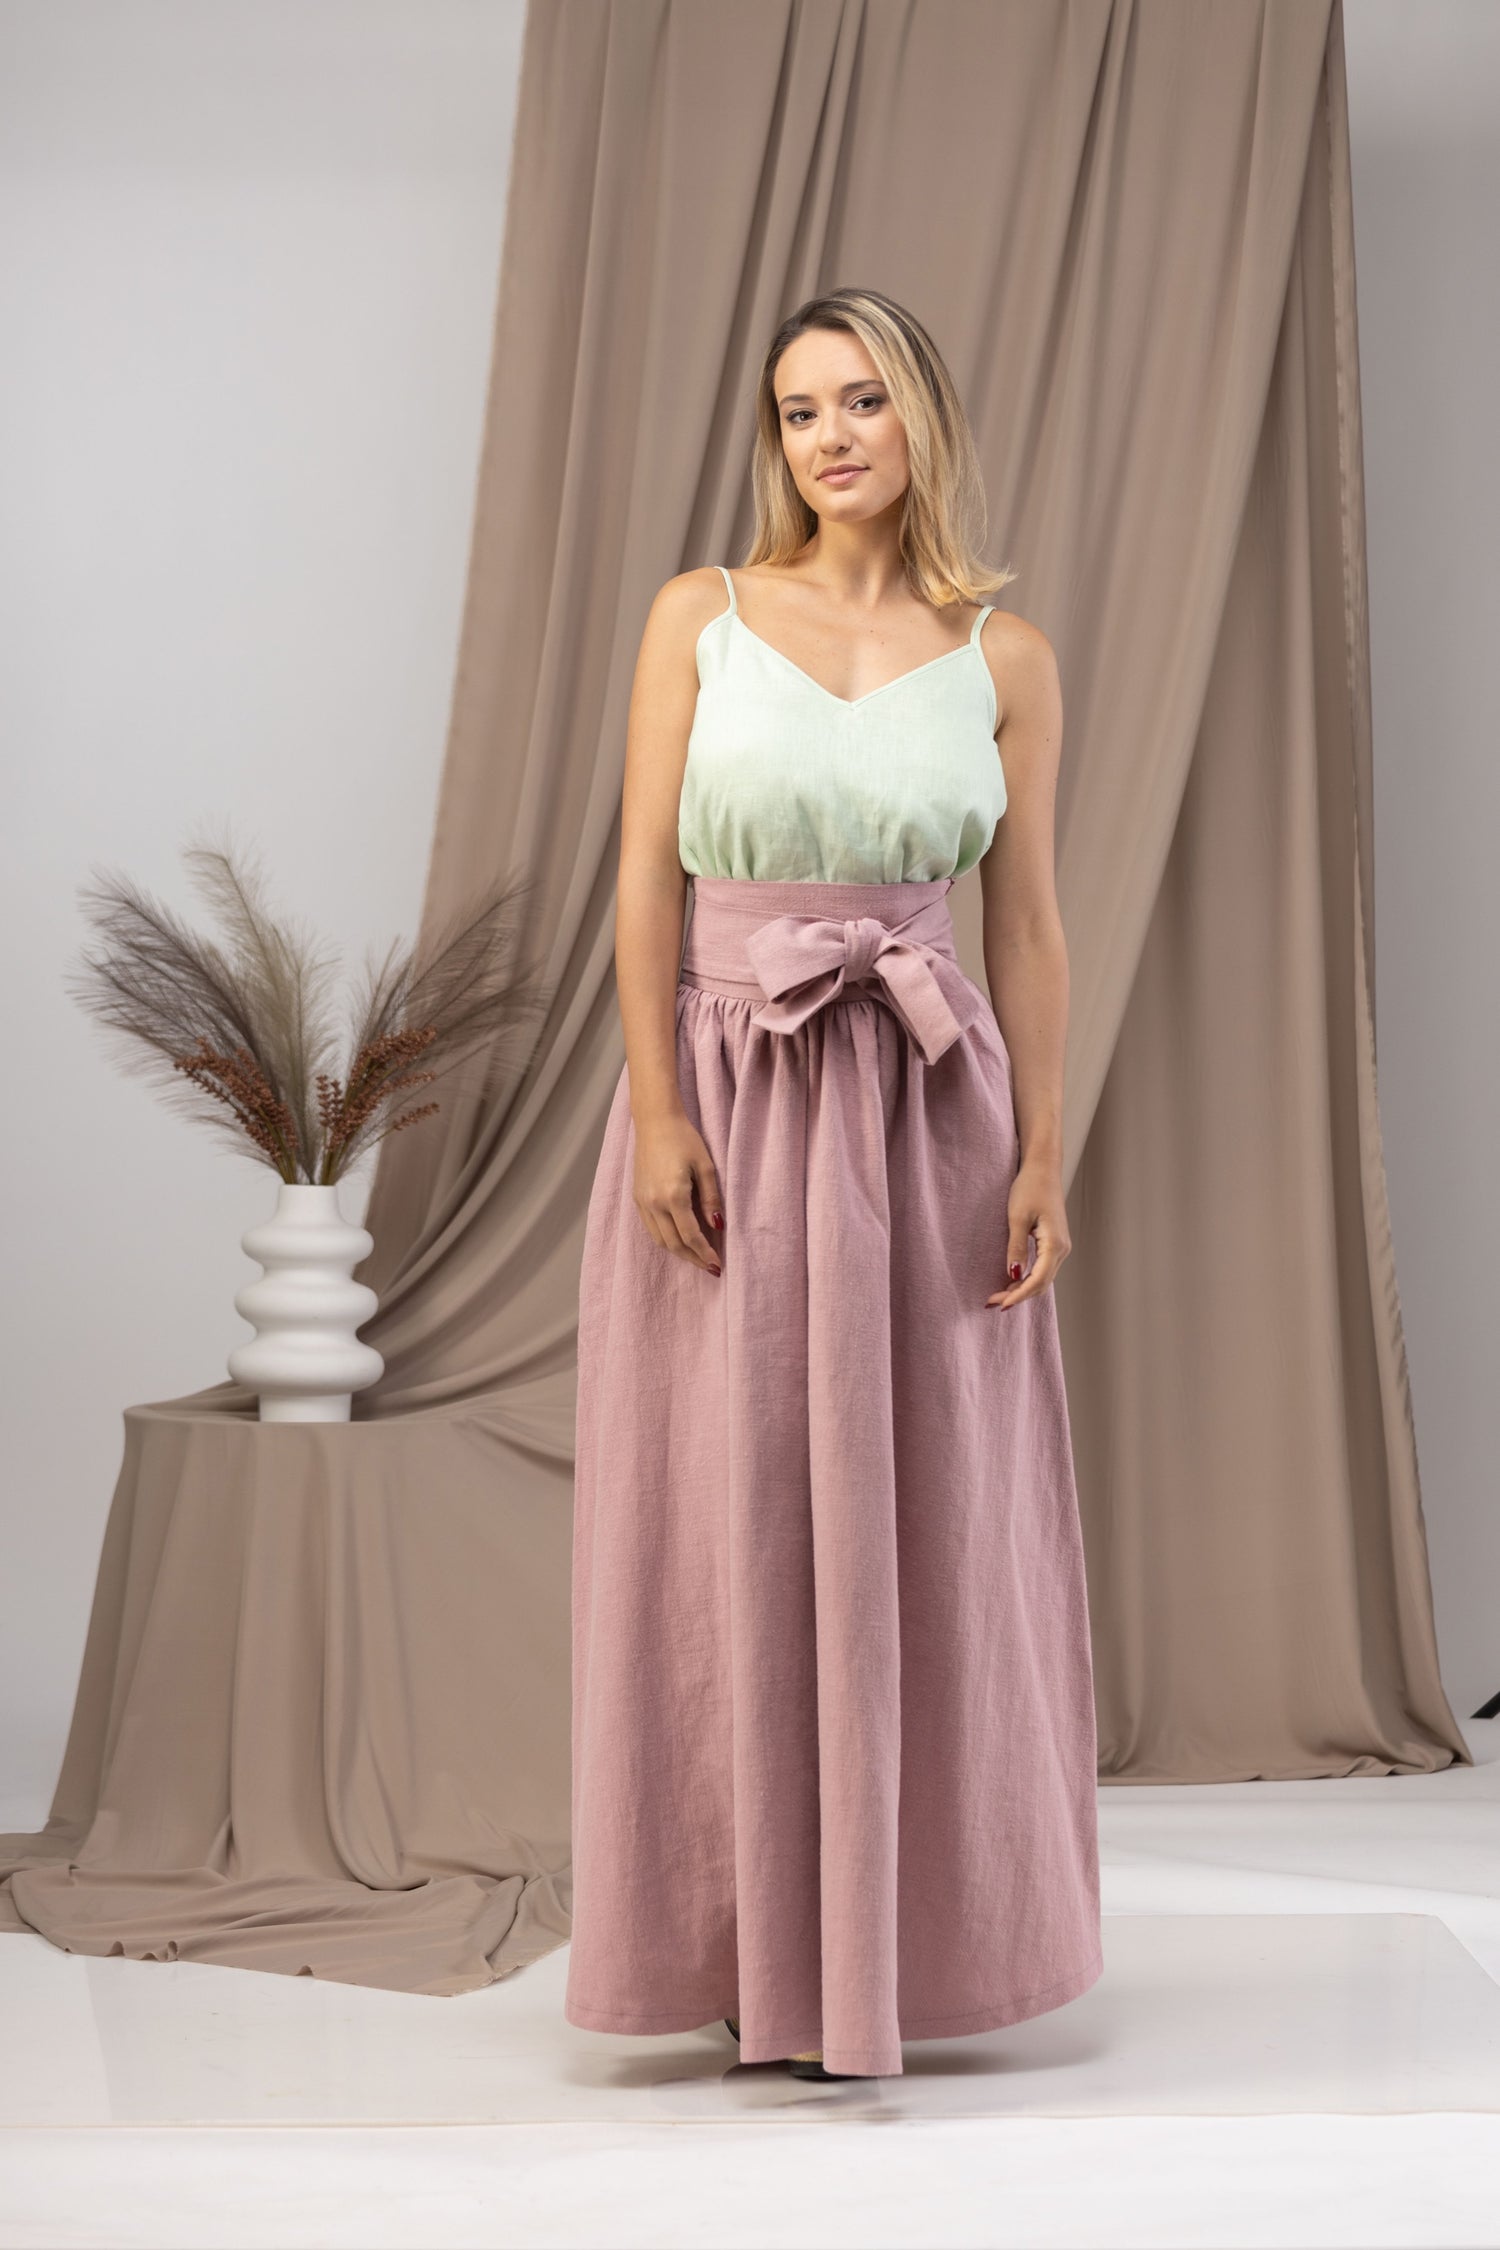 Maxi Skirt perfect for any occasion - Linen, High Waist, and Pockets - from NikkaPlace | Effortless fashion for easy living